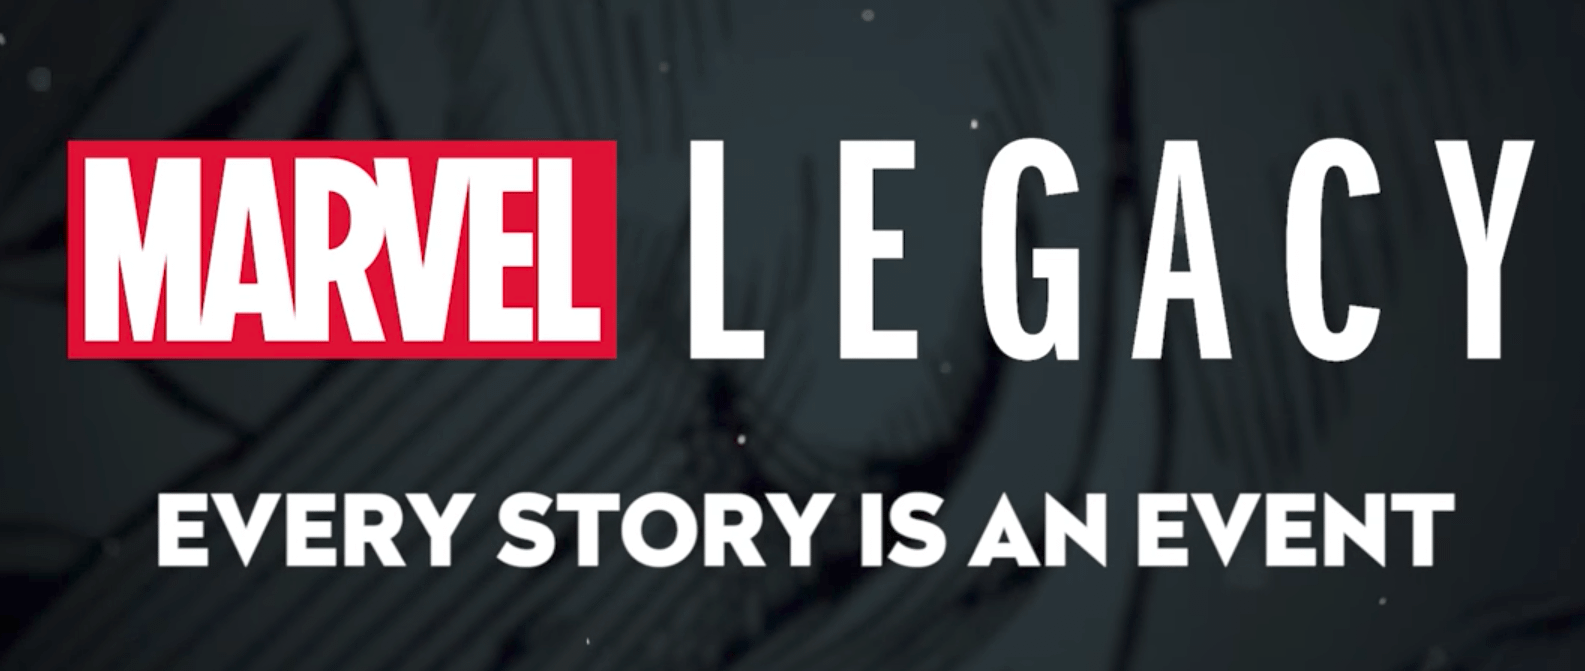 What Fatigue? "Every Story Is An Event" In New Marvel Legacy Trailer